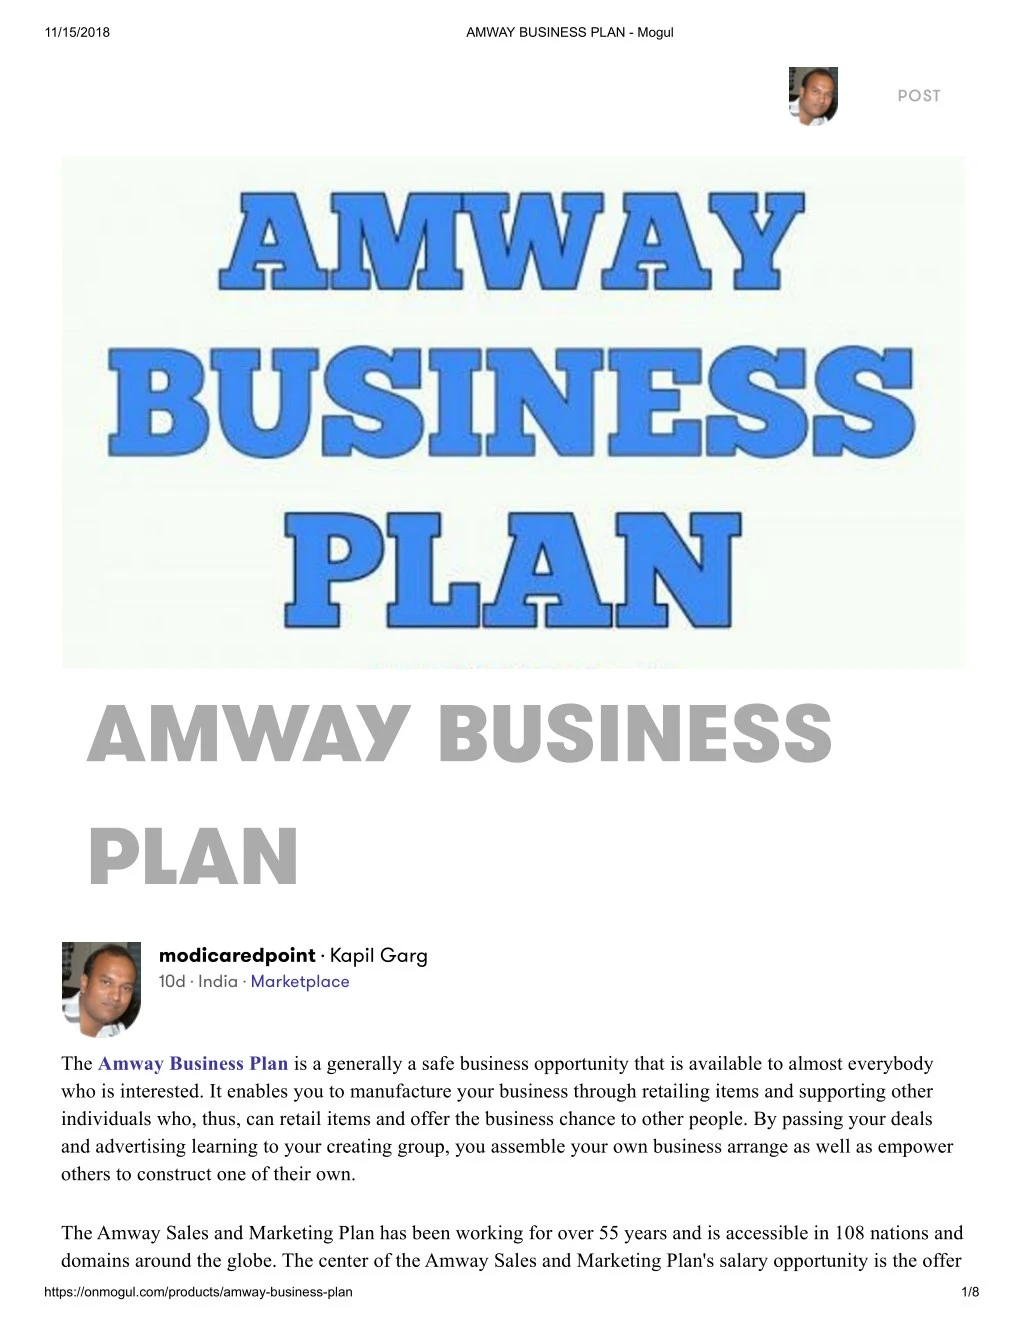 amway business plan powerpoint presentation